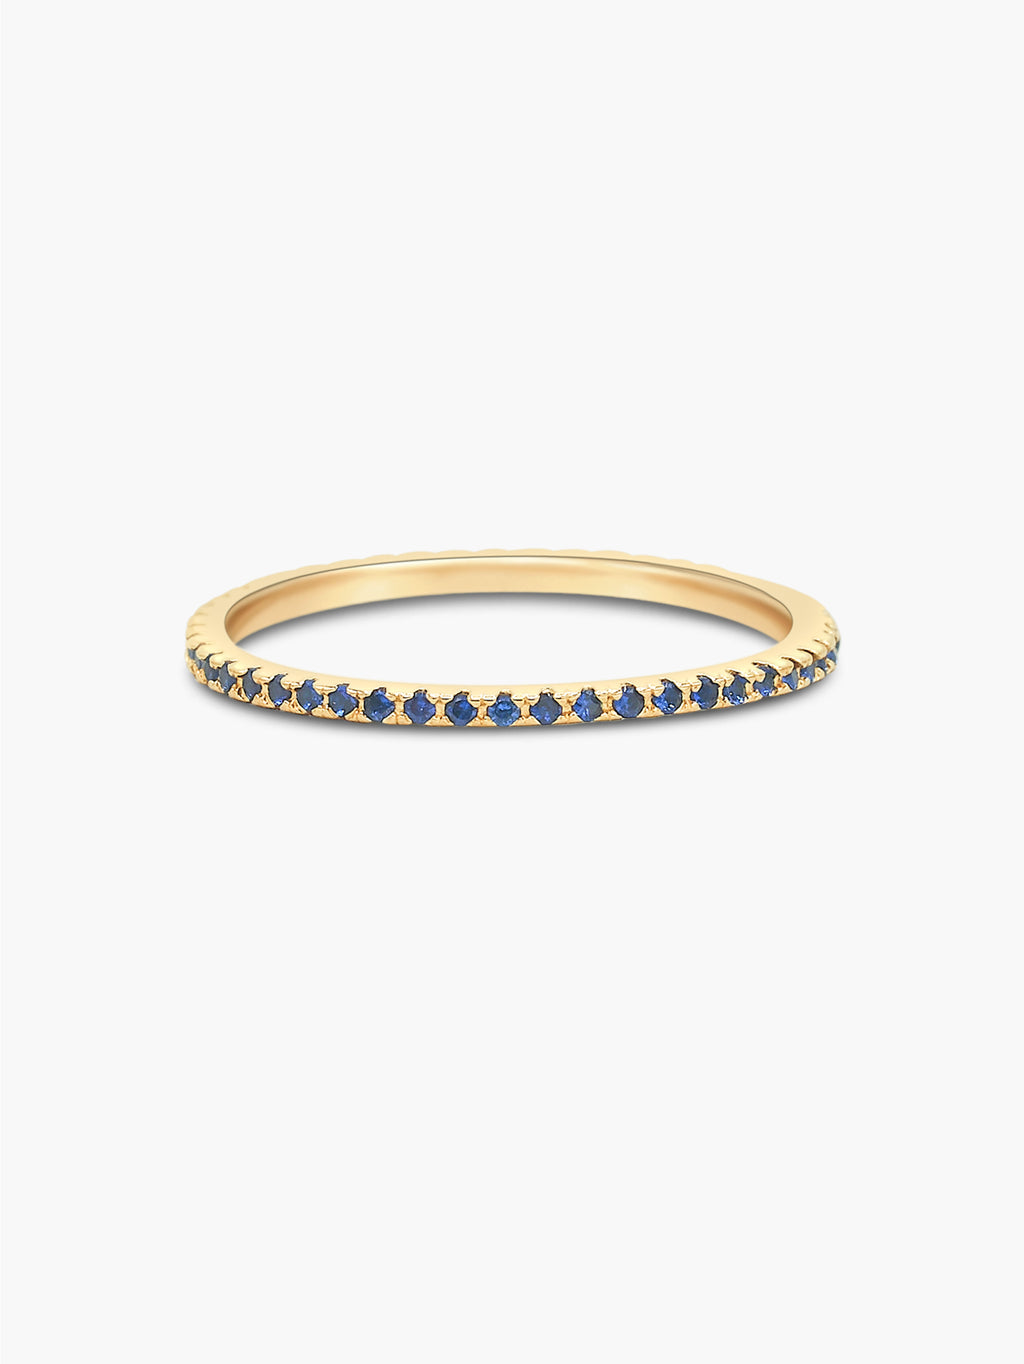 gold eternity band with blue CZ